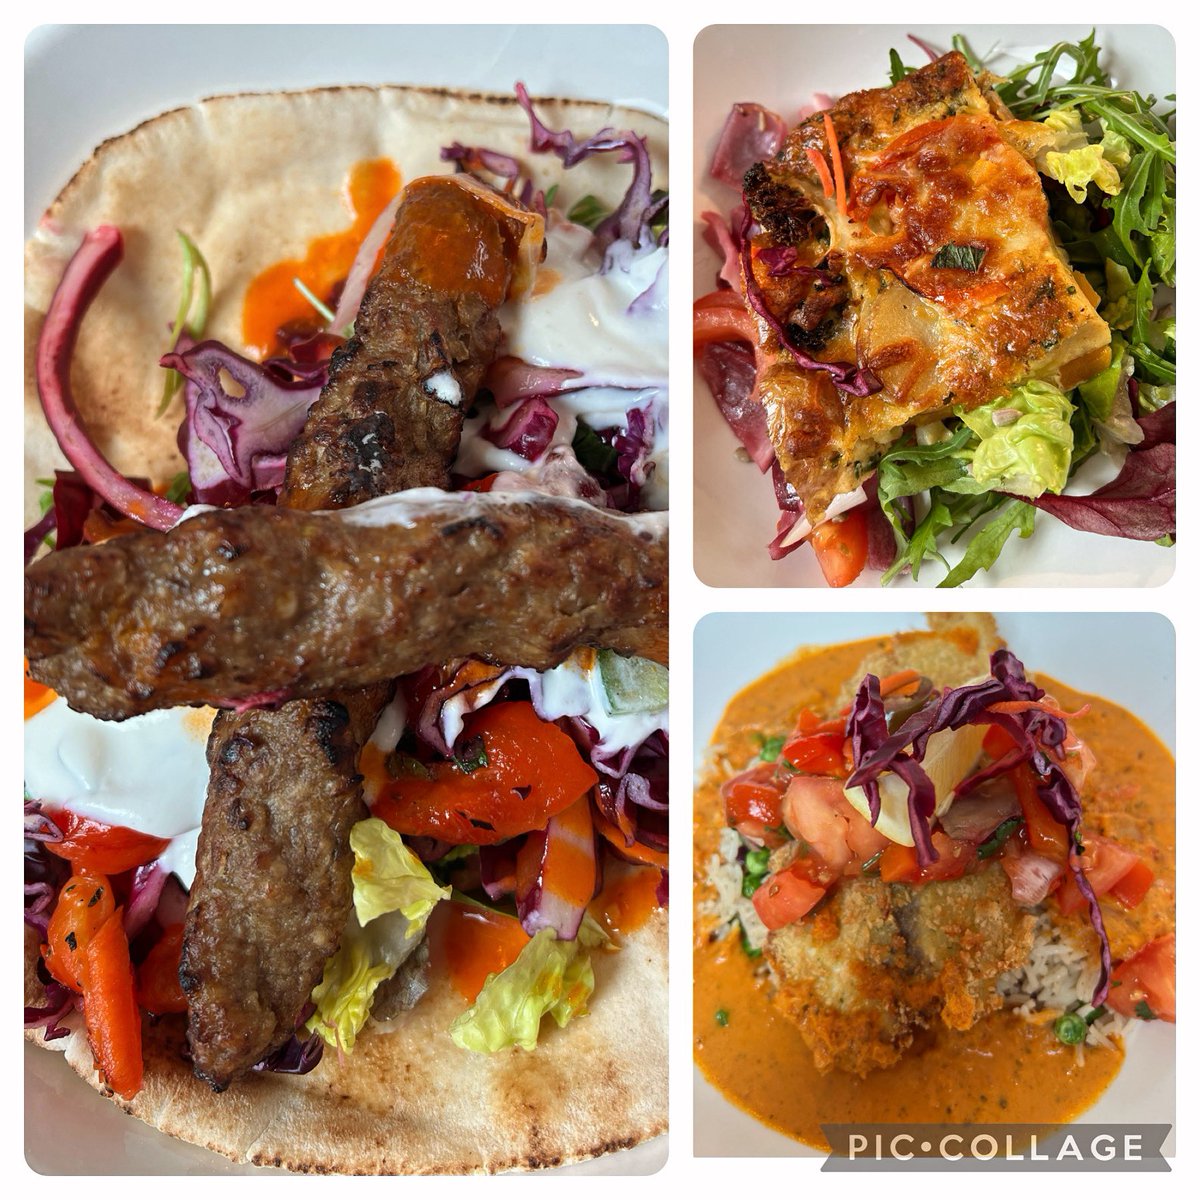 New dishes!!! In the EDUkitchen we are serving: -Lamb Shish, Flatbread & Minted Yoghurt -Butternut Squash and Broccoli Frittata & Mixed Leaf -Tilapia Fish Curry, Pilau Rice and Tomato Salad @LoveBritishFood #greathospitalfood